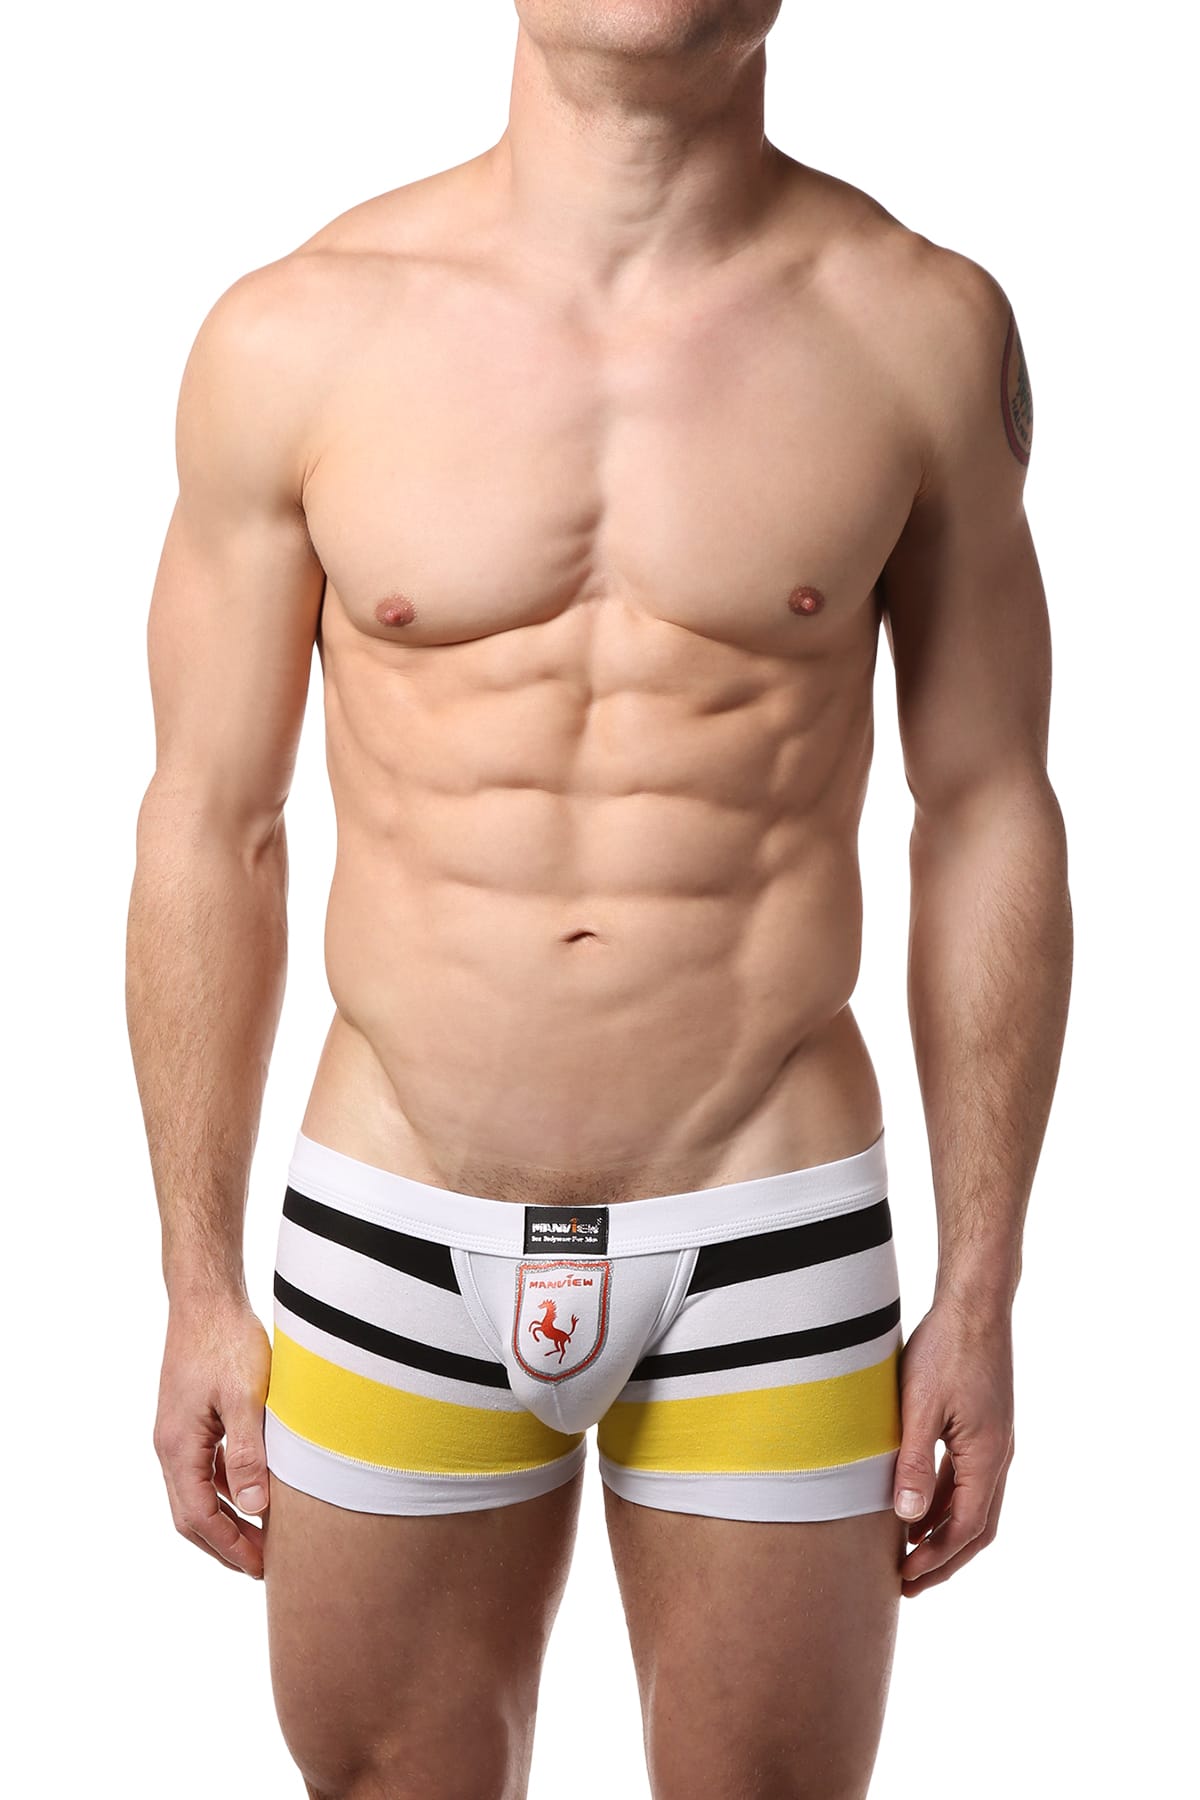 Manview Yellow Striped Trunk